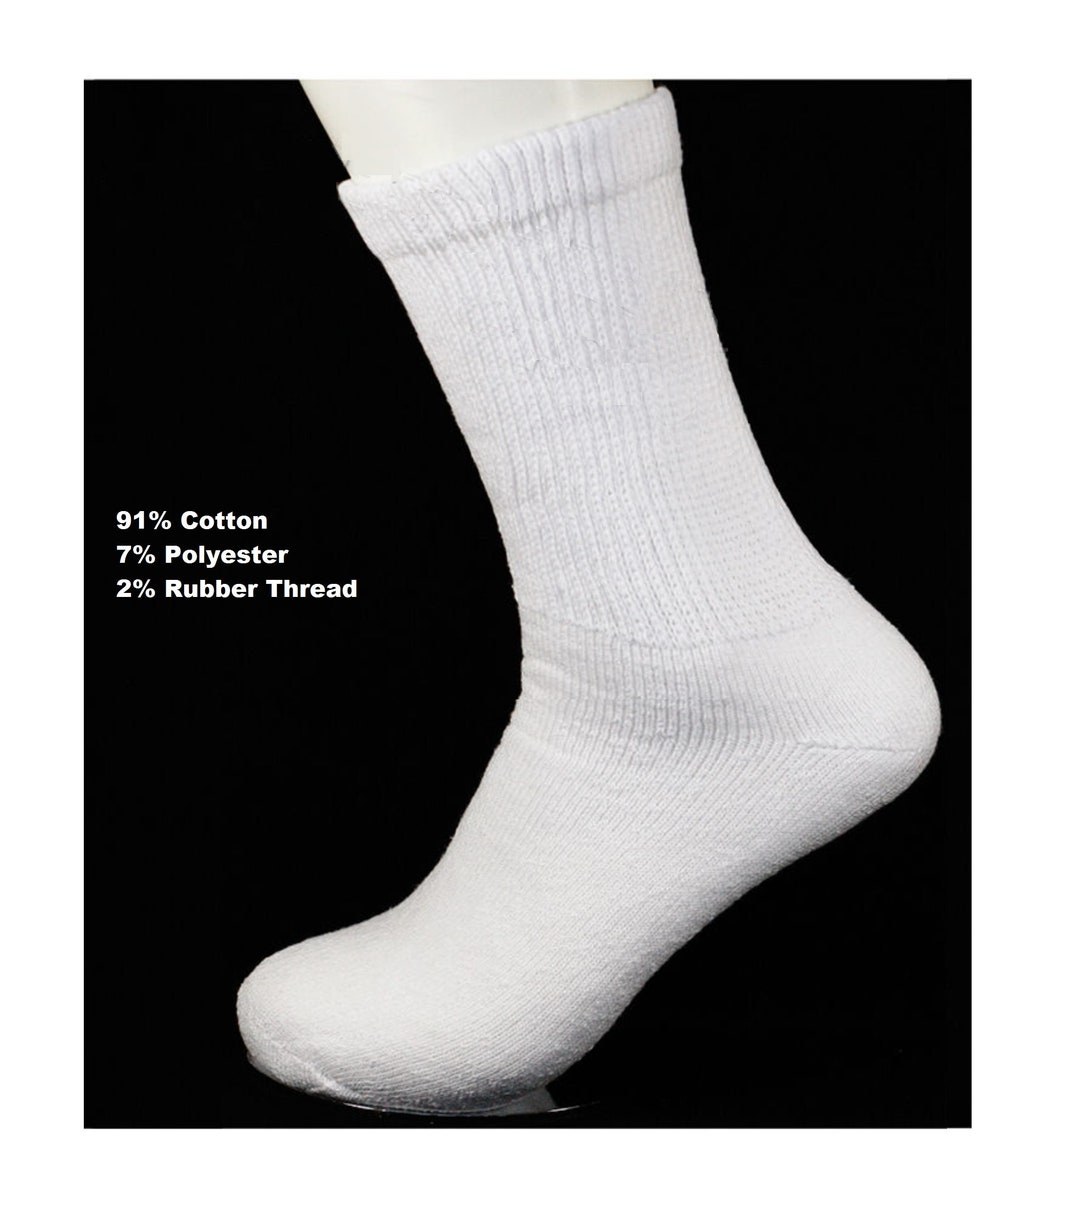 SPORT BY GREAT Black Solid Athletic Ankle Socks 10-13 メンズ - スーツ